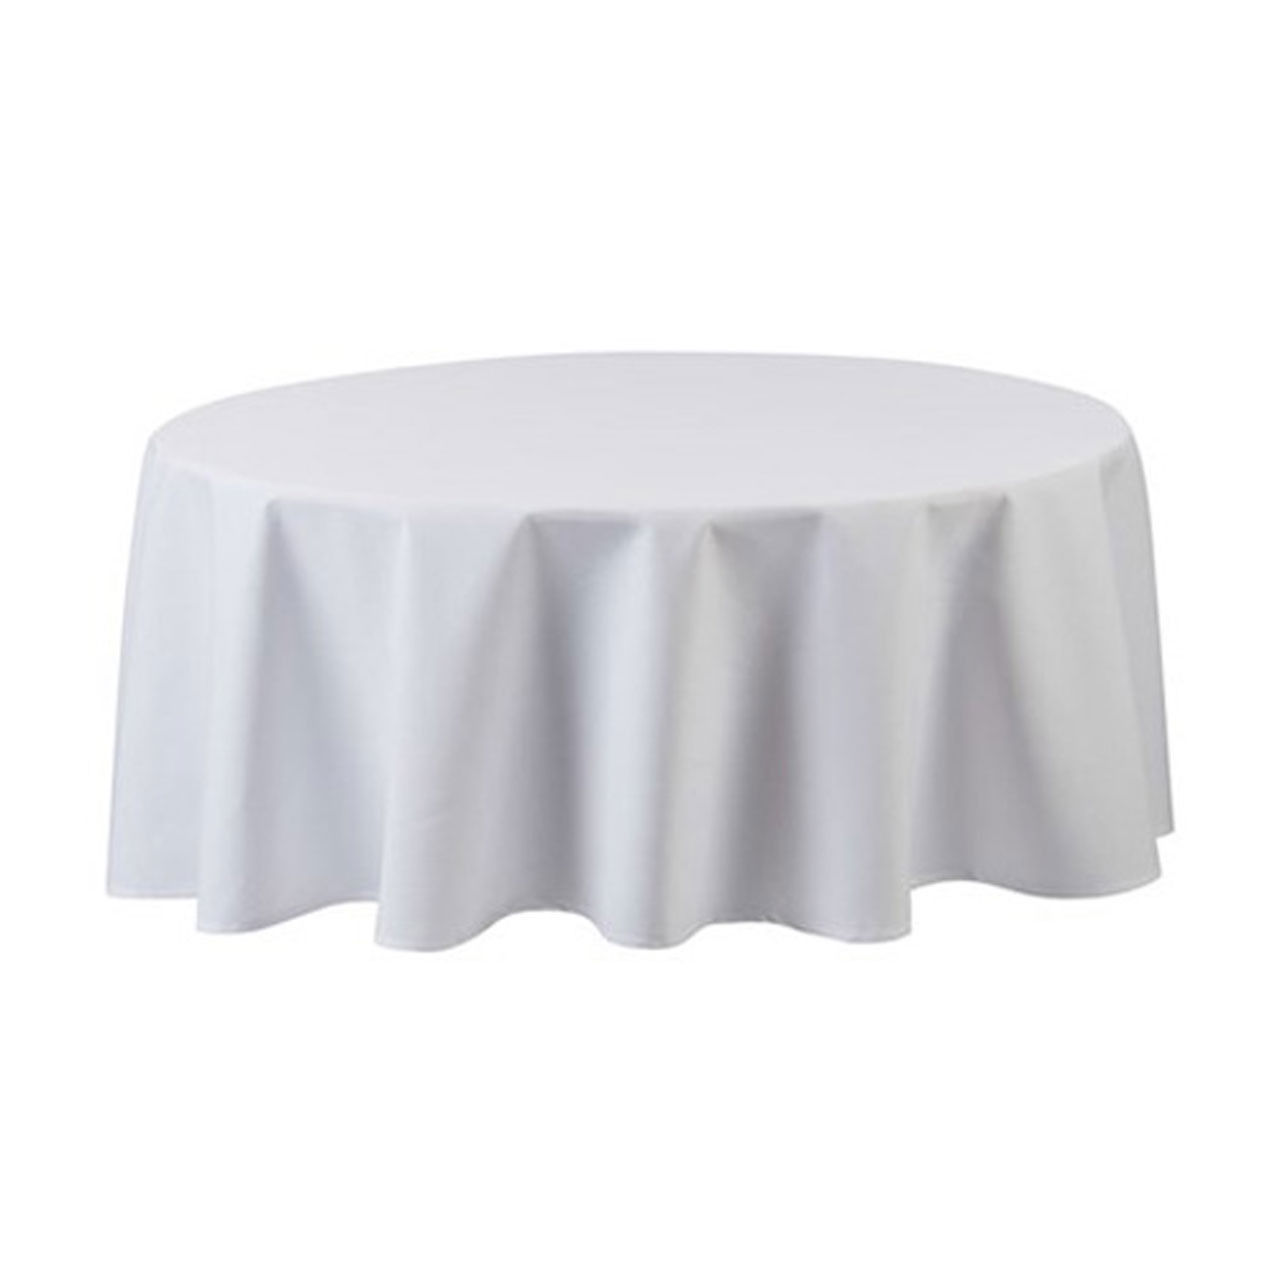 Can you describe the features of the 90 round tablecloth in Seamless White?